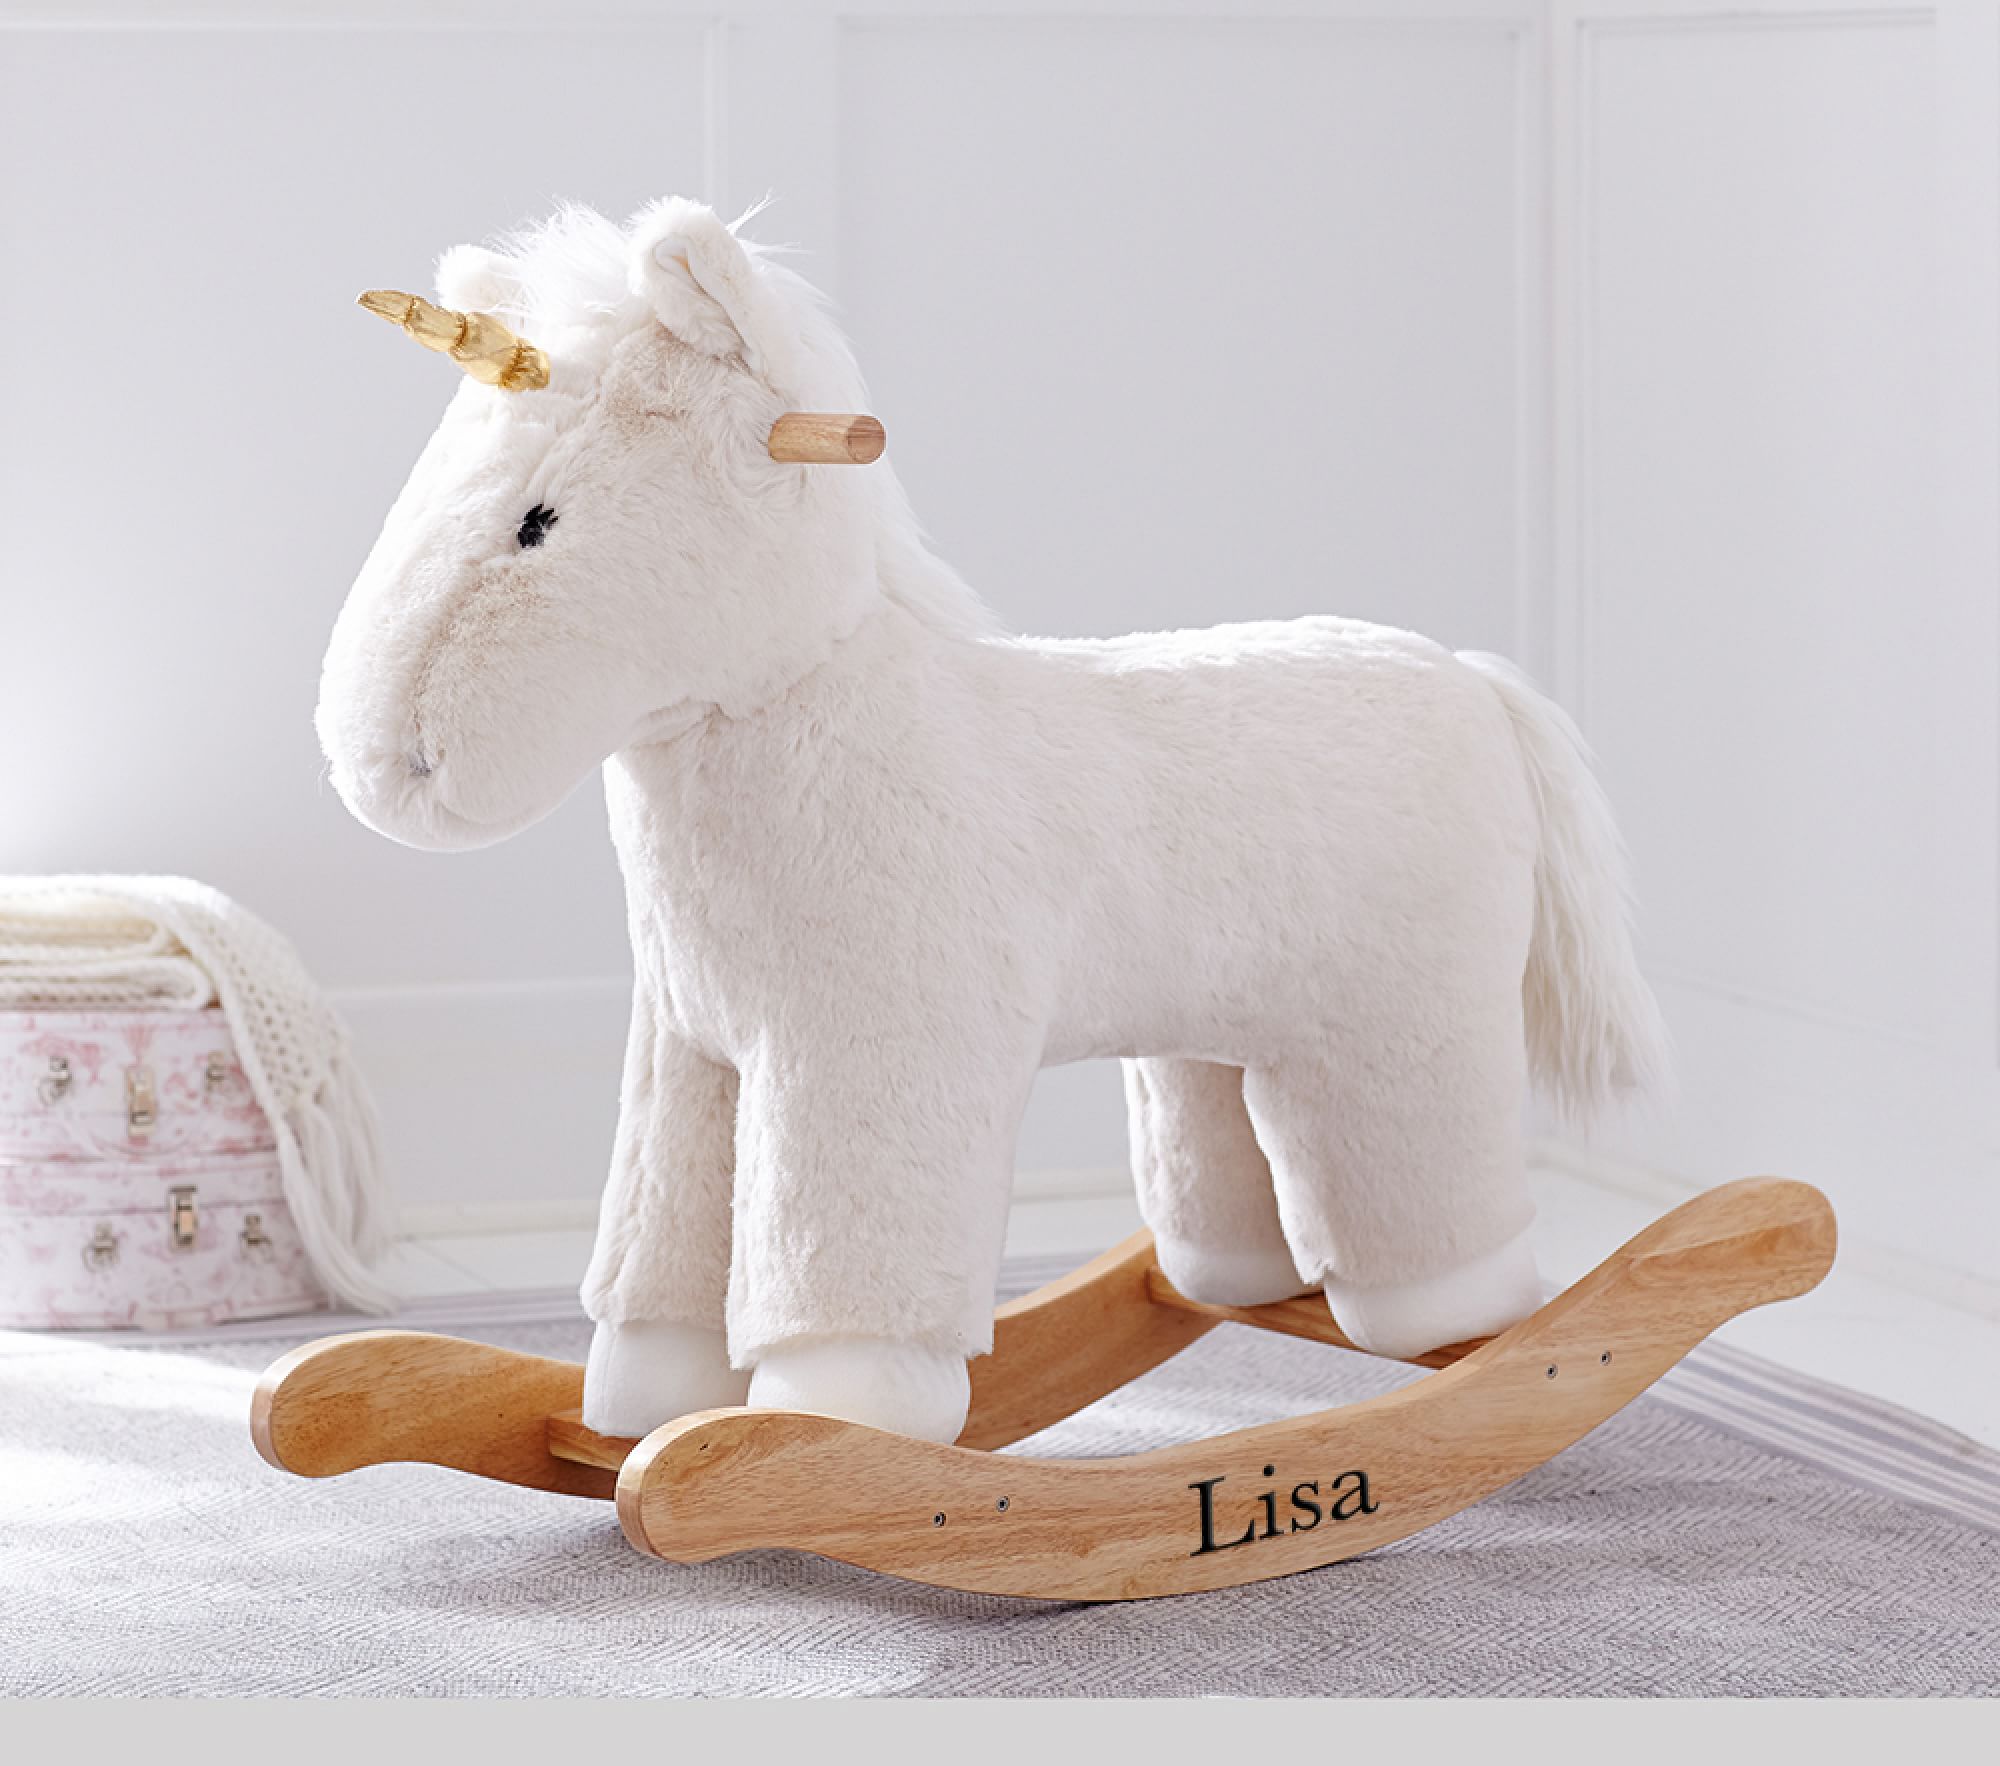 20 of the Best Unicorn Gifts of 2022 - PureWow